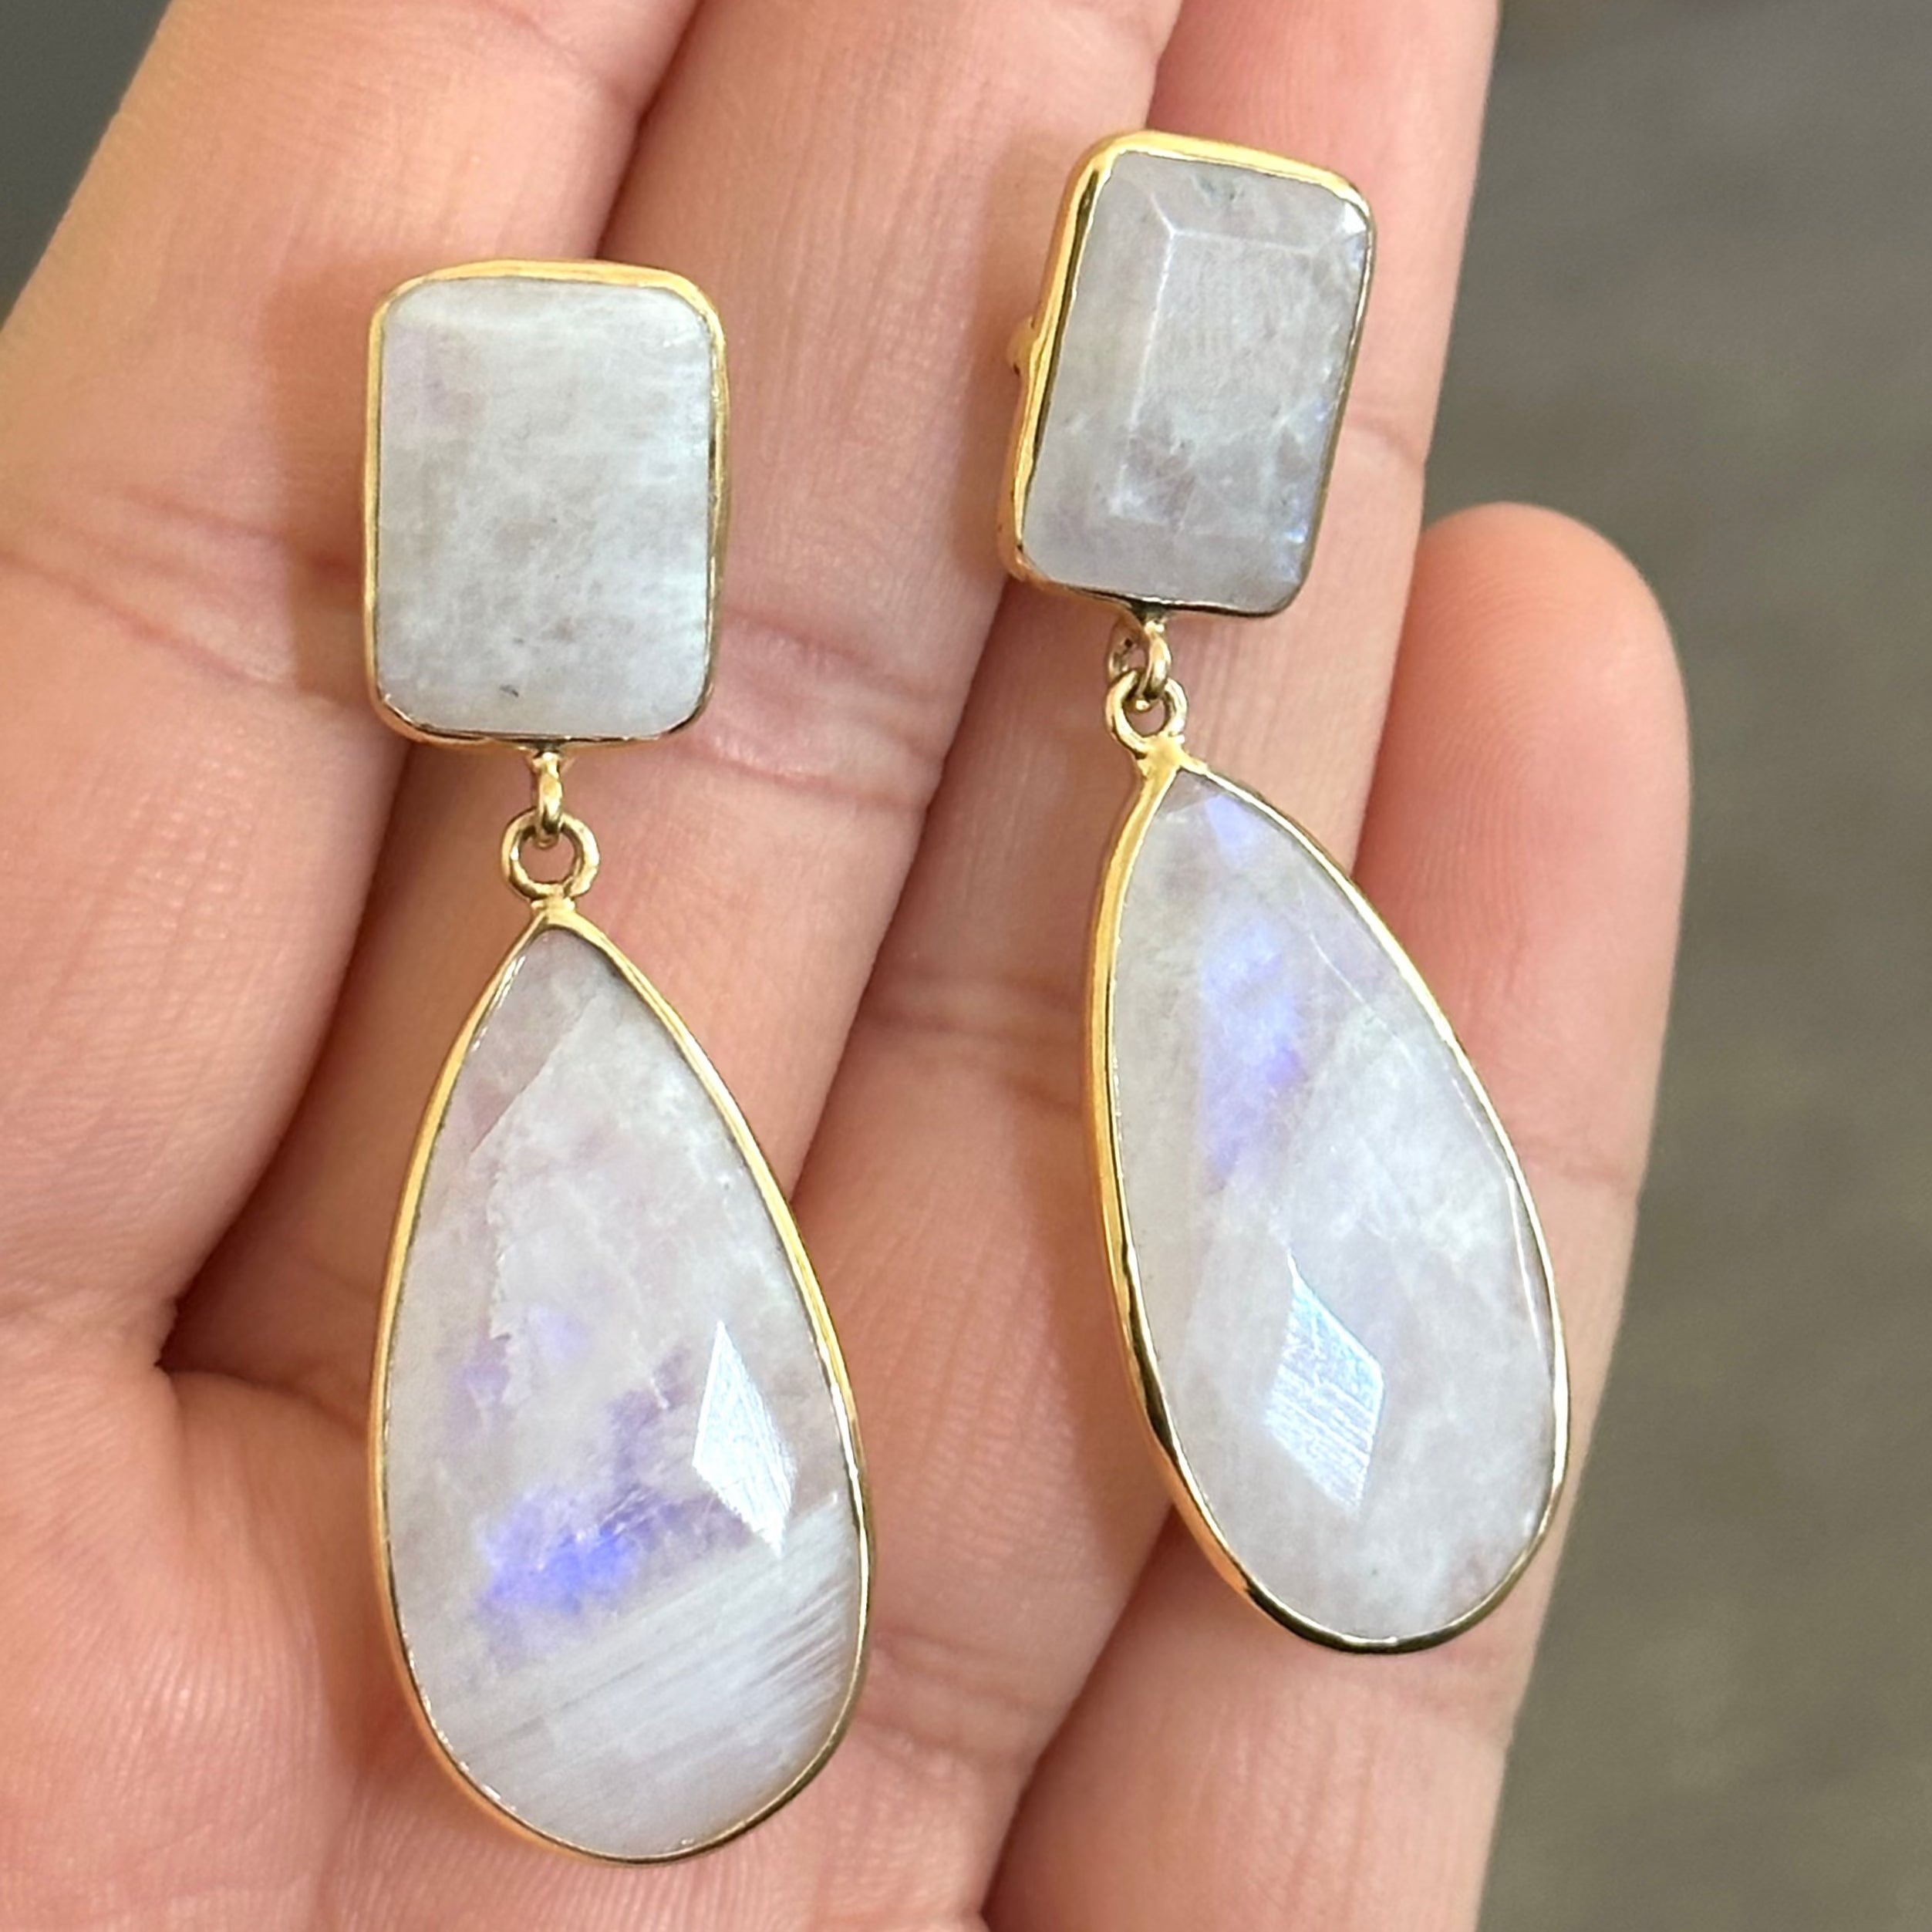 Long Statement Earrings with a Rectangle Stone and Long Pear Shaped Stone Drop - Moonstone